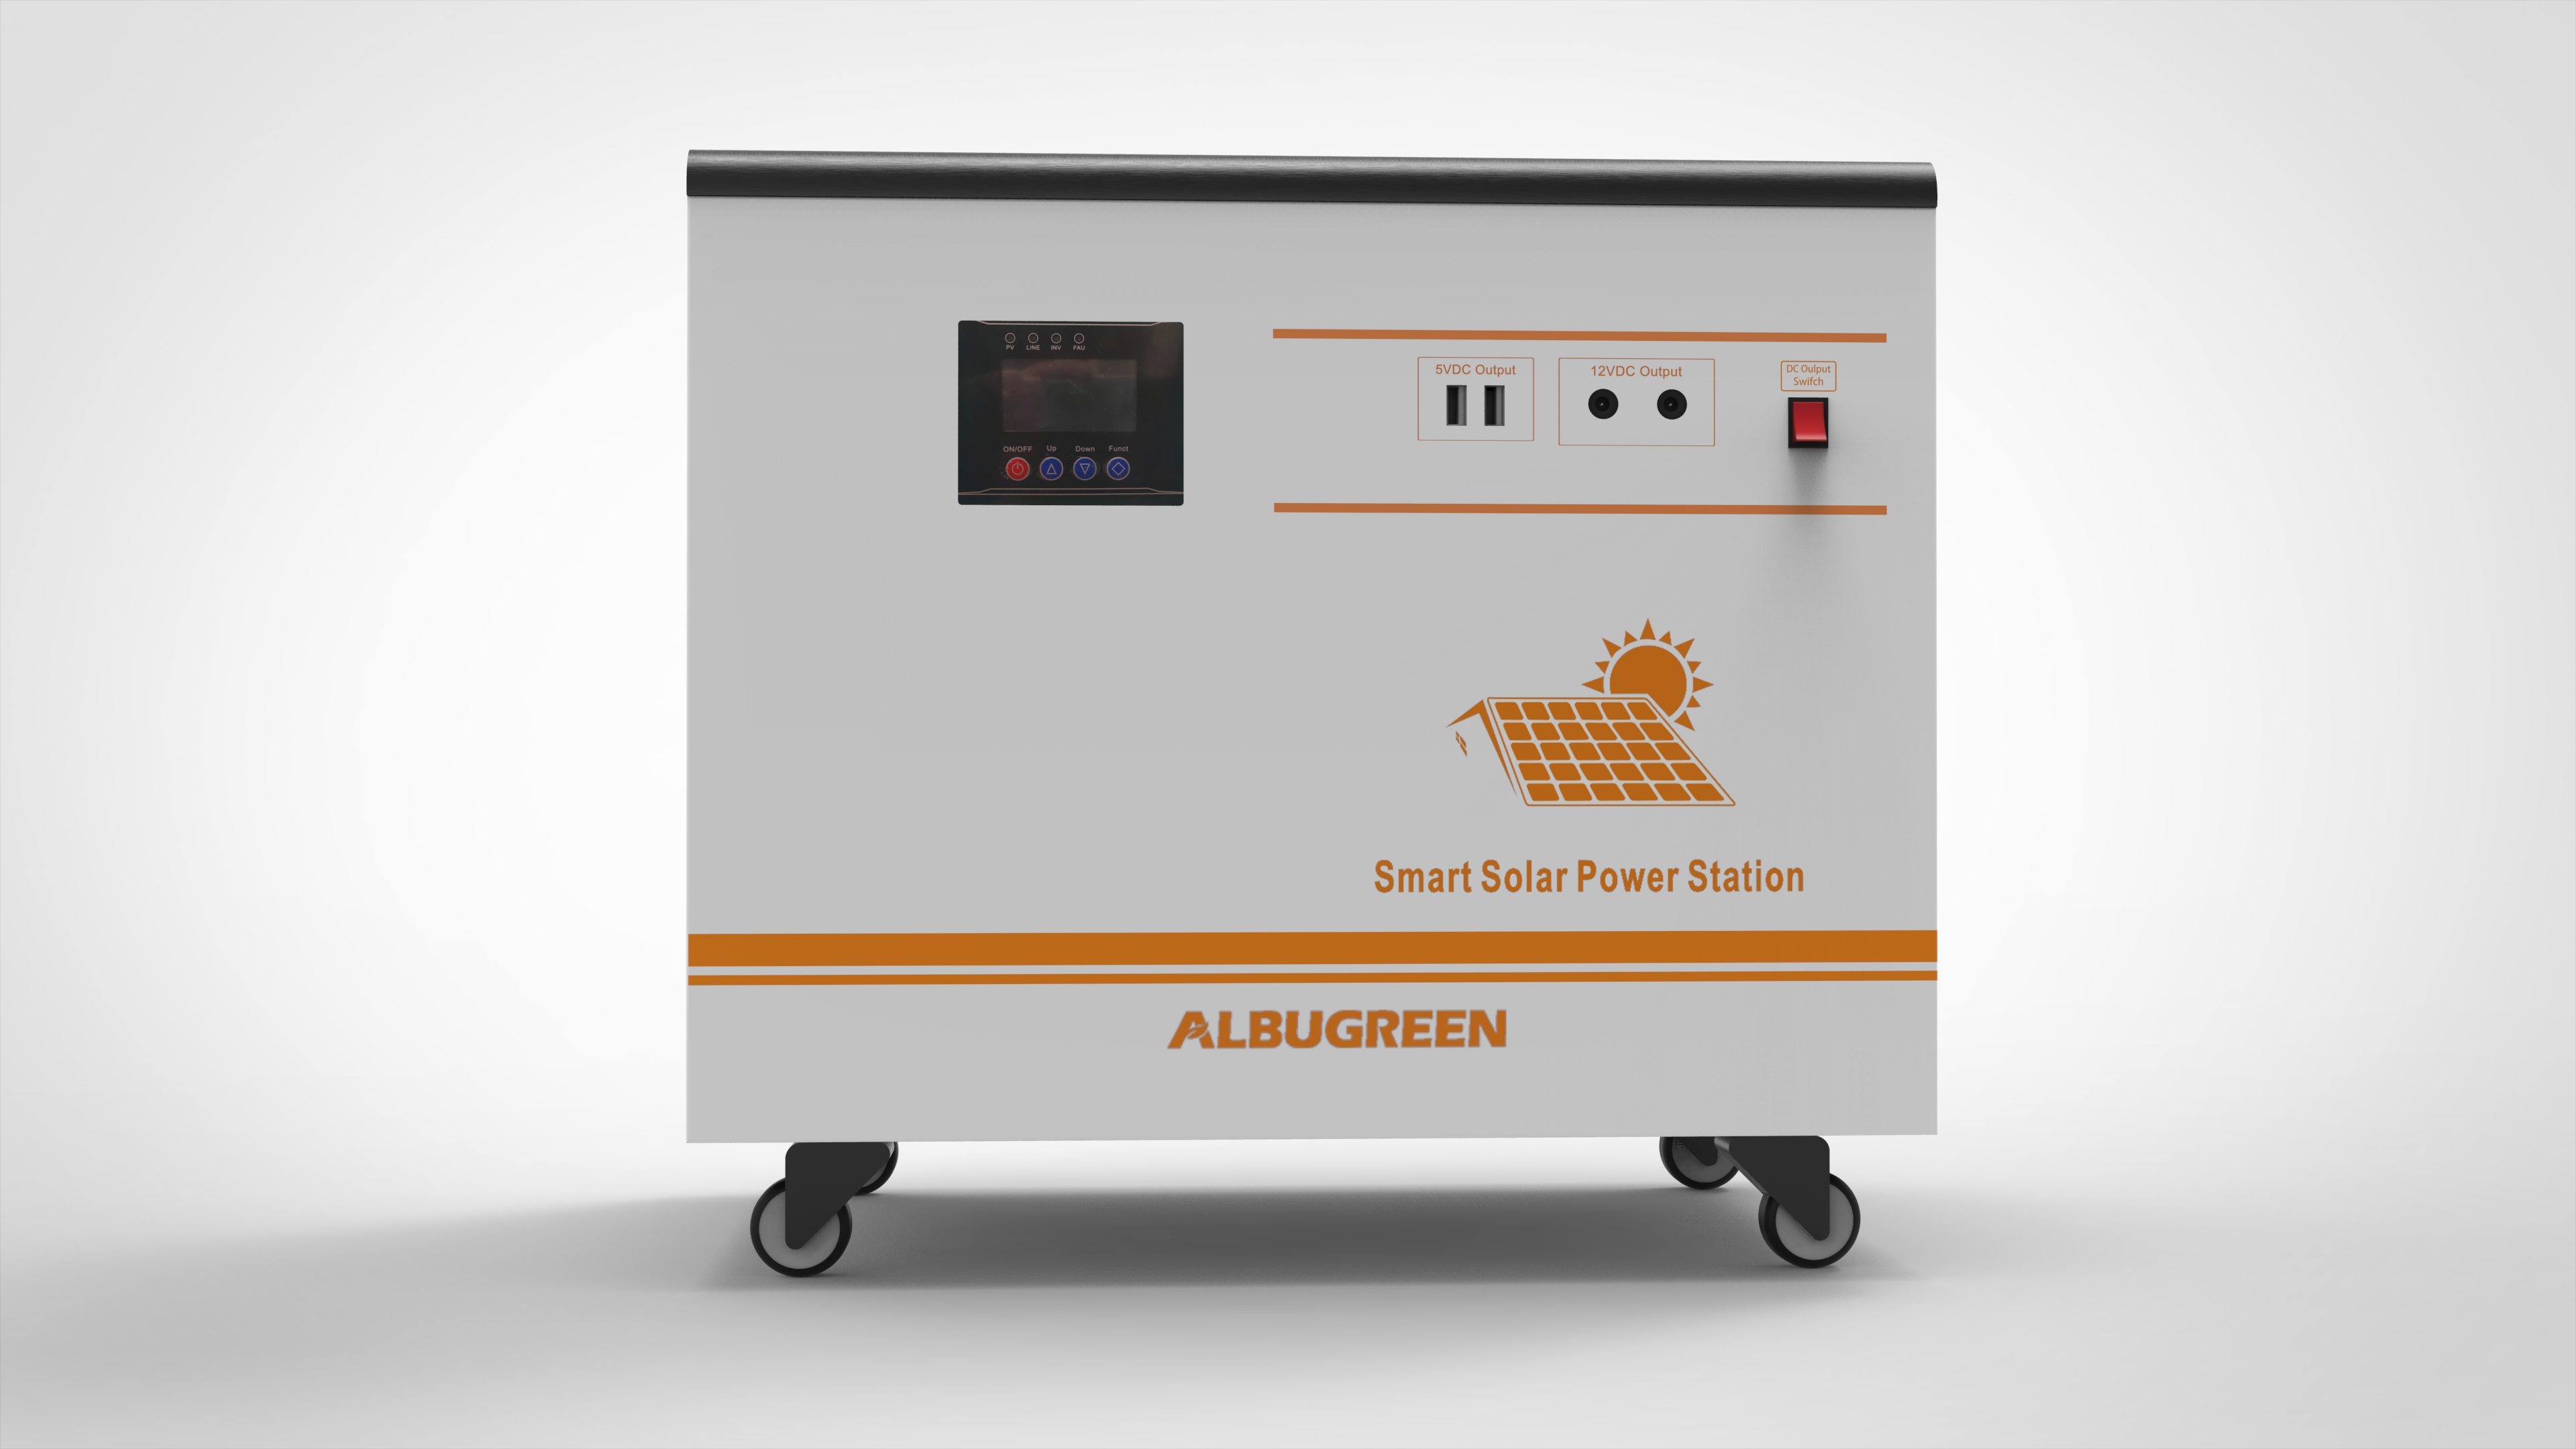 3000w 220v Ac in One Solar Power System for The Home